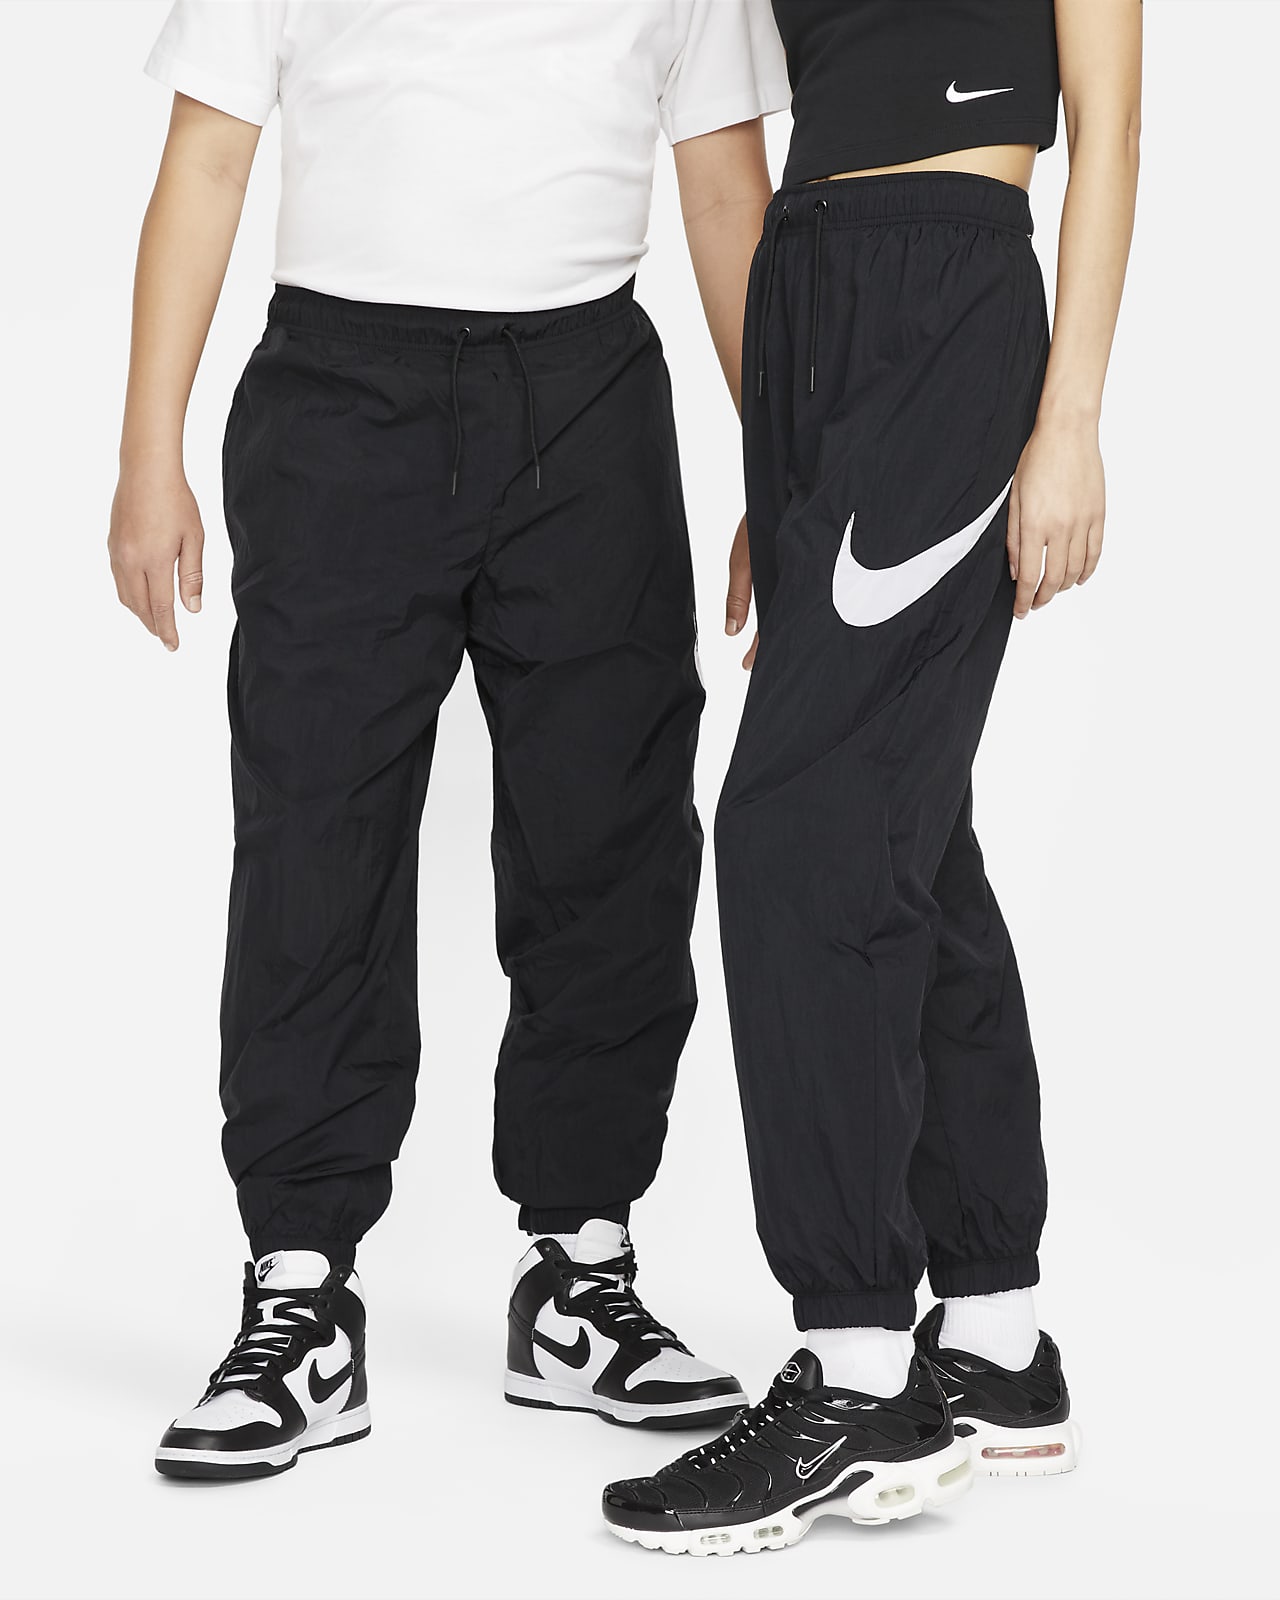 https://static.nike.com/a/images/t_PDP_1280_v1/f_auto,q_auto:eco/4d704a15-a1a6-4bbf-98fe-a0adbf4482d9/sportswear-essential-mid-rise-trousers-L7mfNs.png